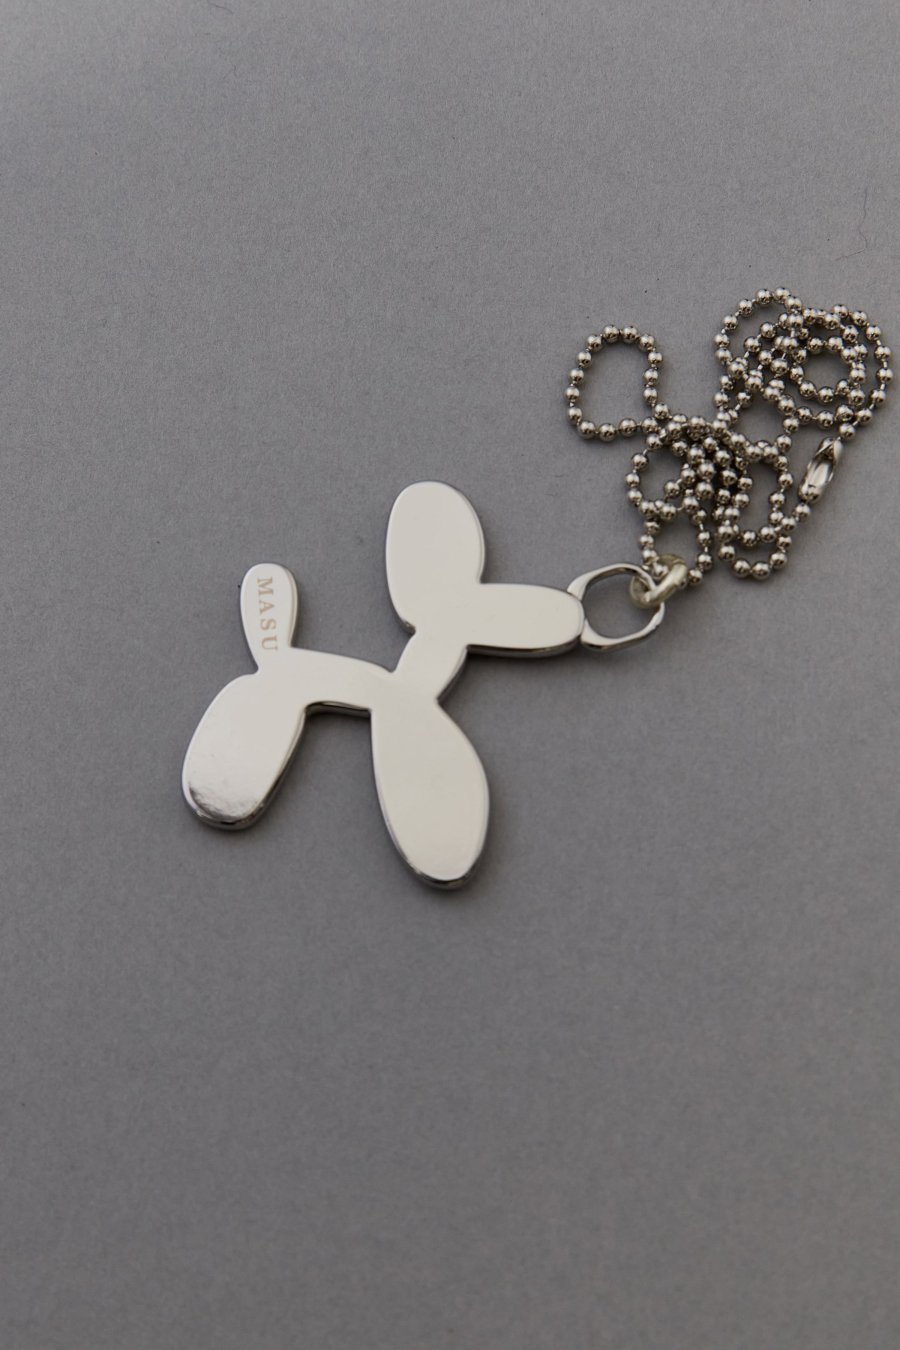 MASU  BALLOON DOG NECKLACE<img class='new_mark_img2' src='https://img.shop-pro.jp/img/new/icons15.gif' style='border:none;display:inline;margin:0px;padding:0px;width:auto;' />